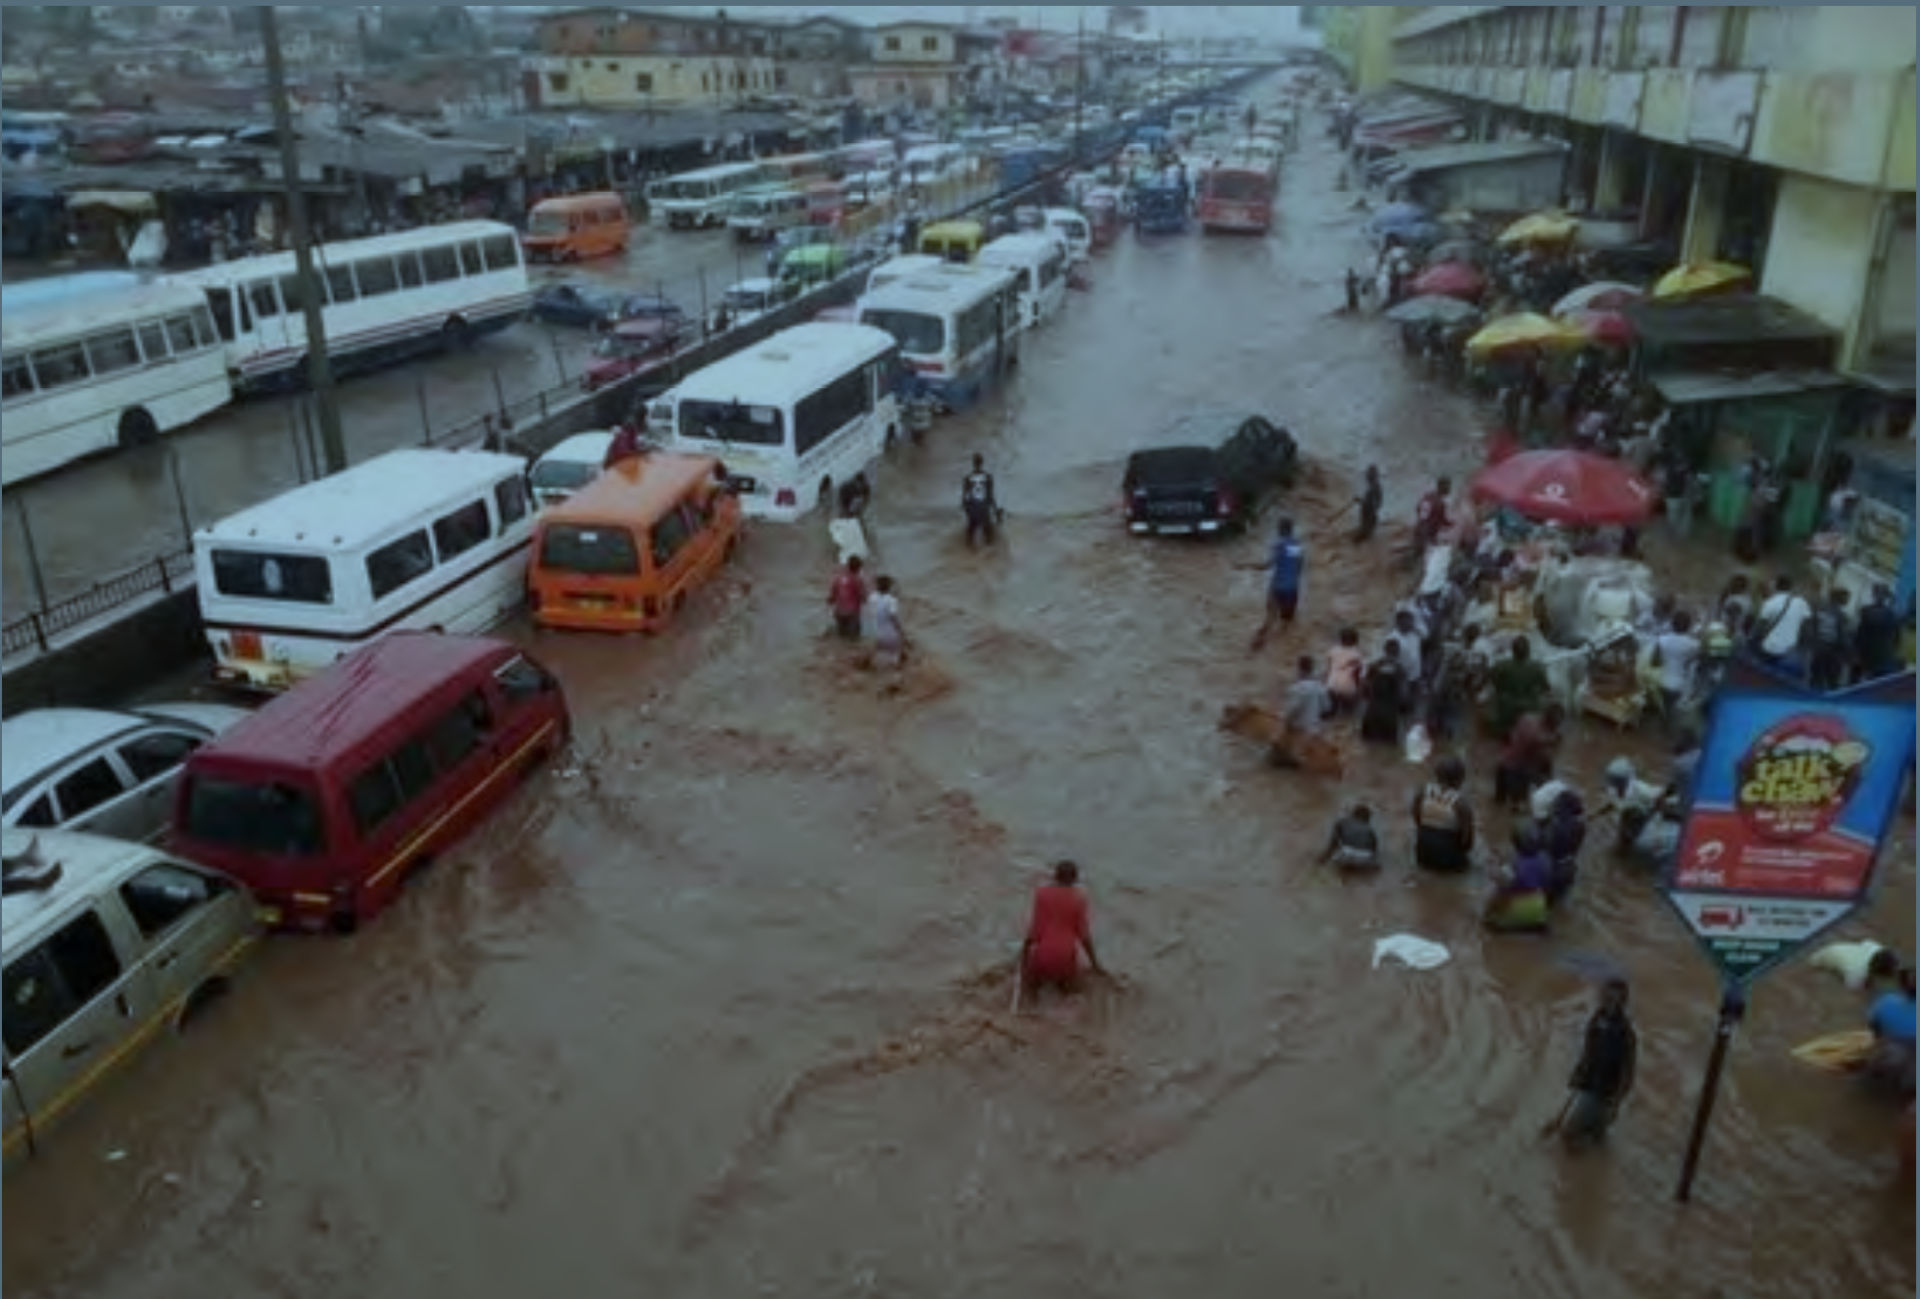 Flooding in Accra, Ghana, June 2015. Photo coutesy of pulse.com.gh